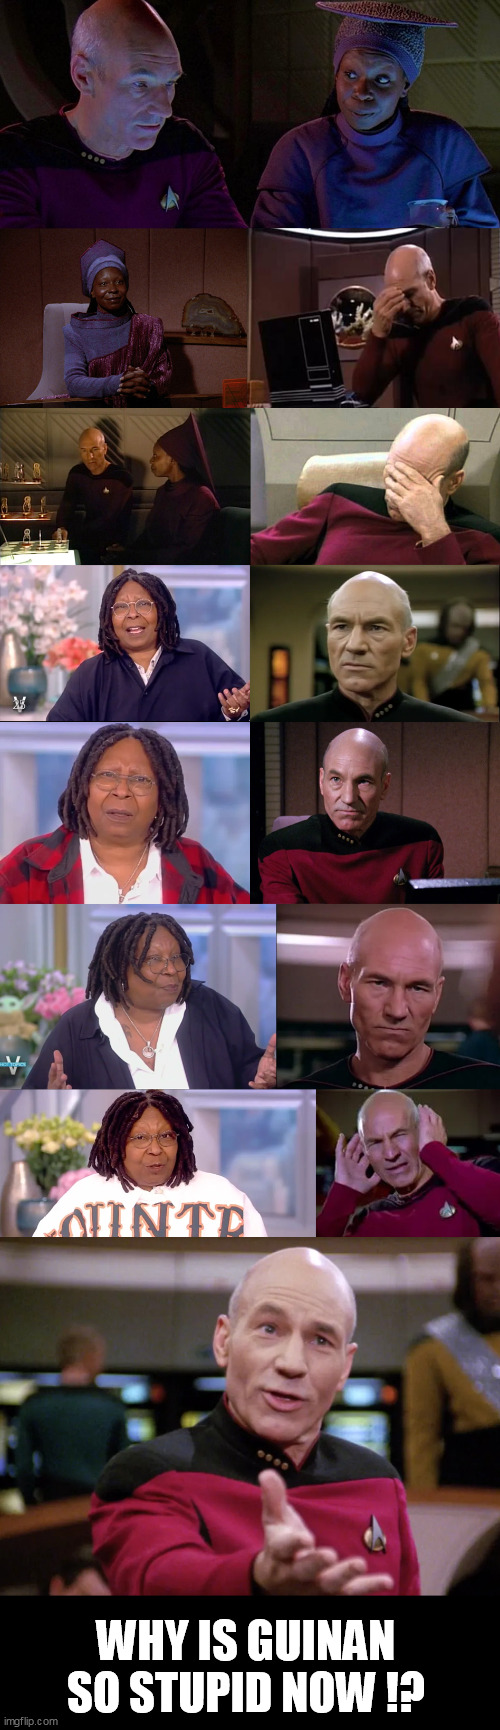  WHY IS GUINAN SO STUPID NOW !? | image tagged in star trek the next generation,guinan,picard wtf and facepalm combined,whoopi goldberg,the view | made w/ Imgflip meme maker